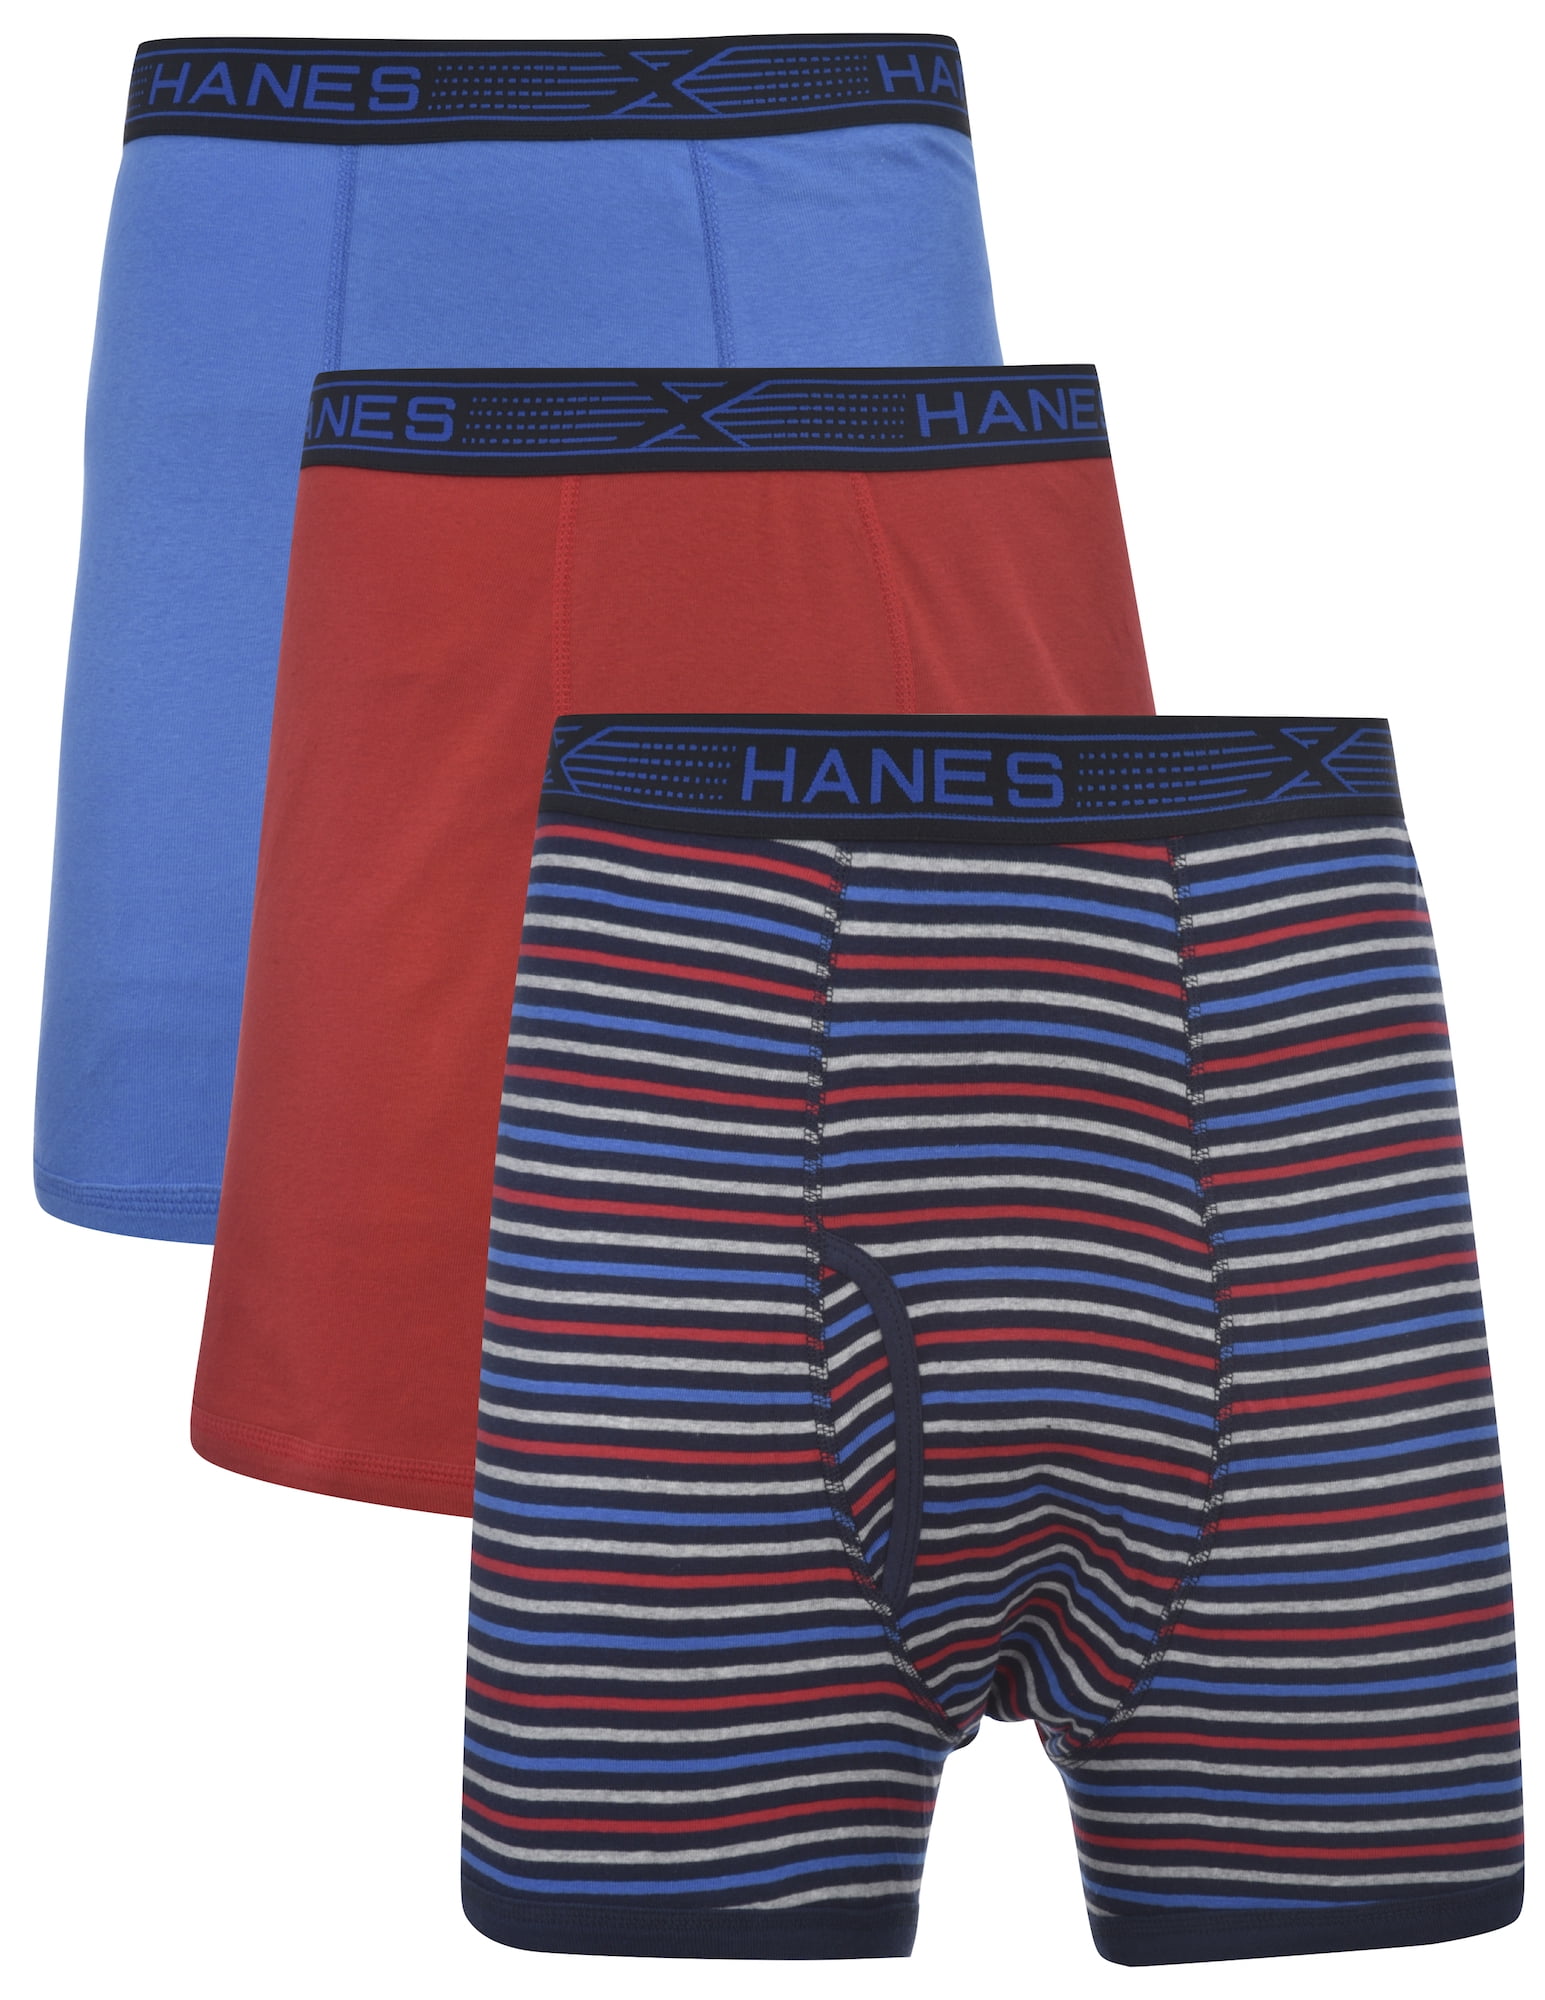 Hanes Men's Big and Tall Boxer Brief with Fresh IQ and Xtemp, Fashion ...